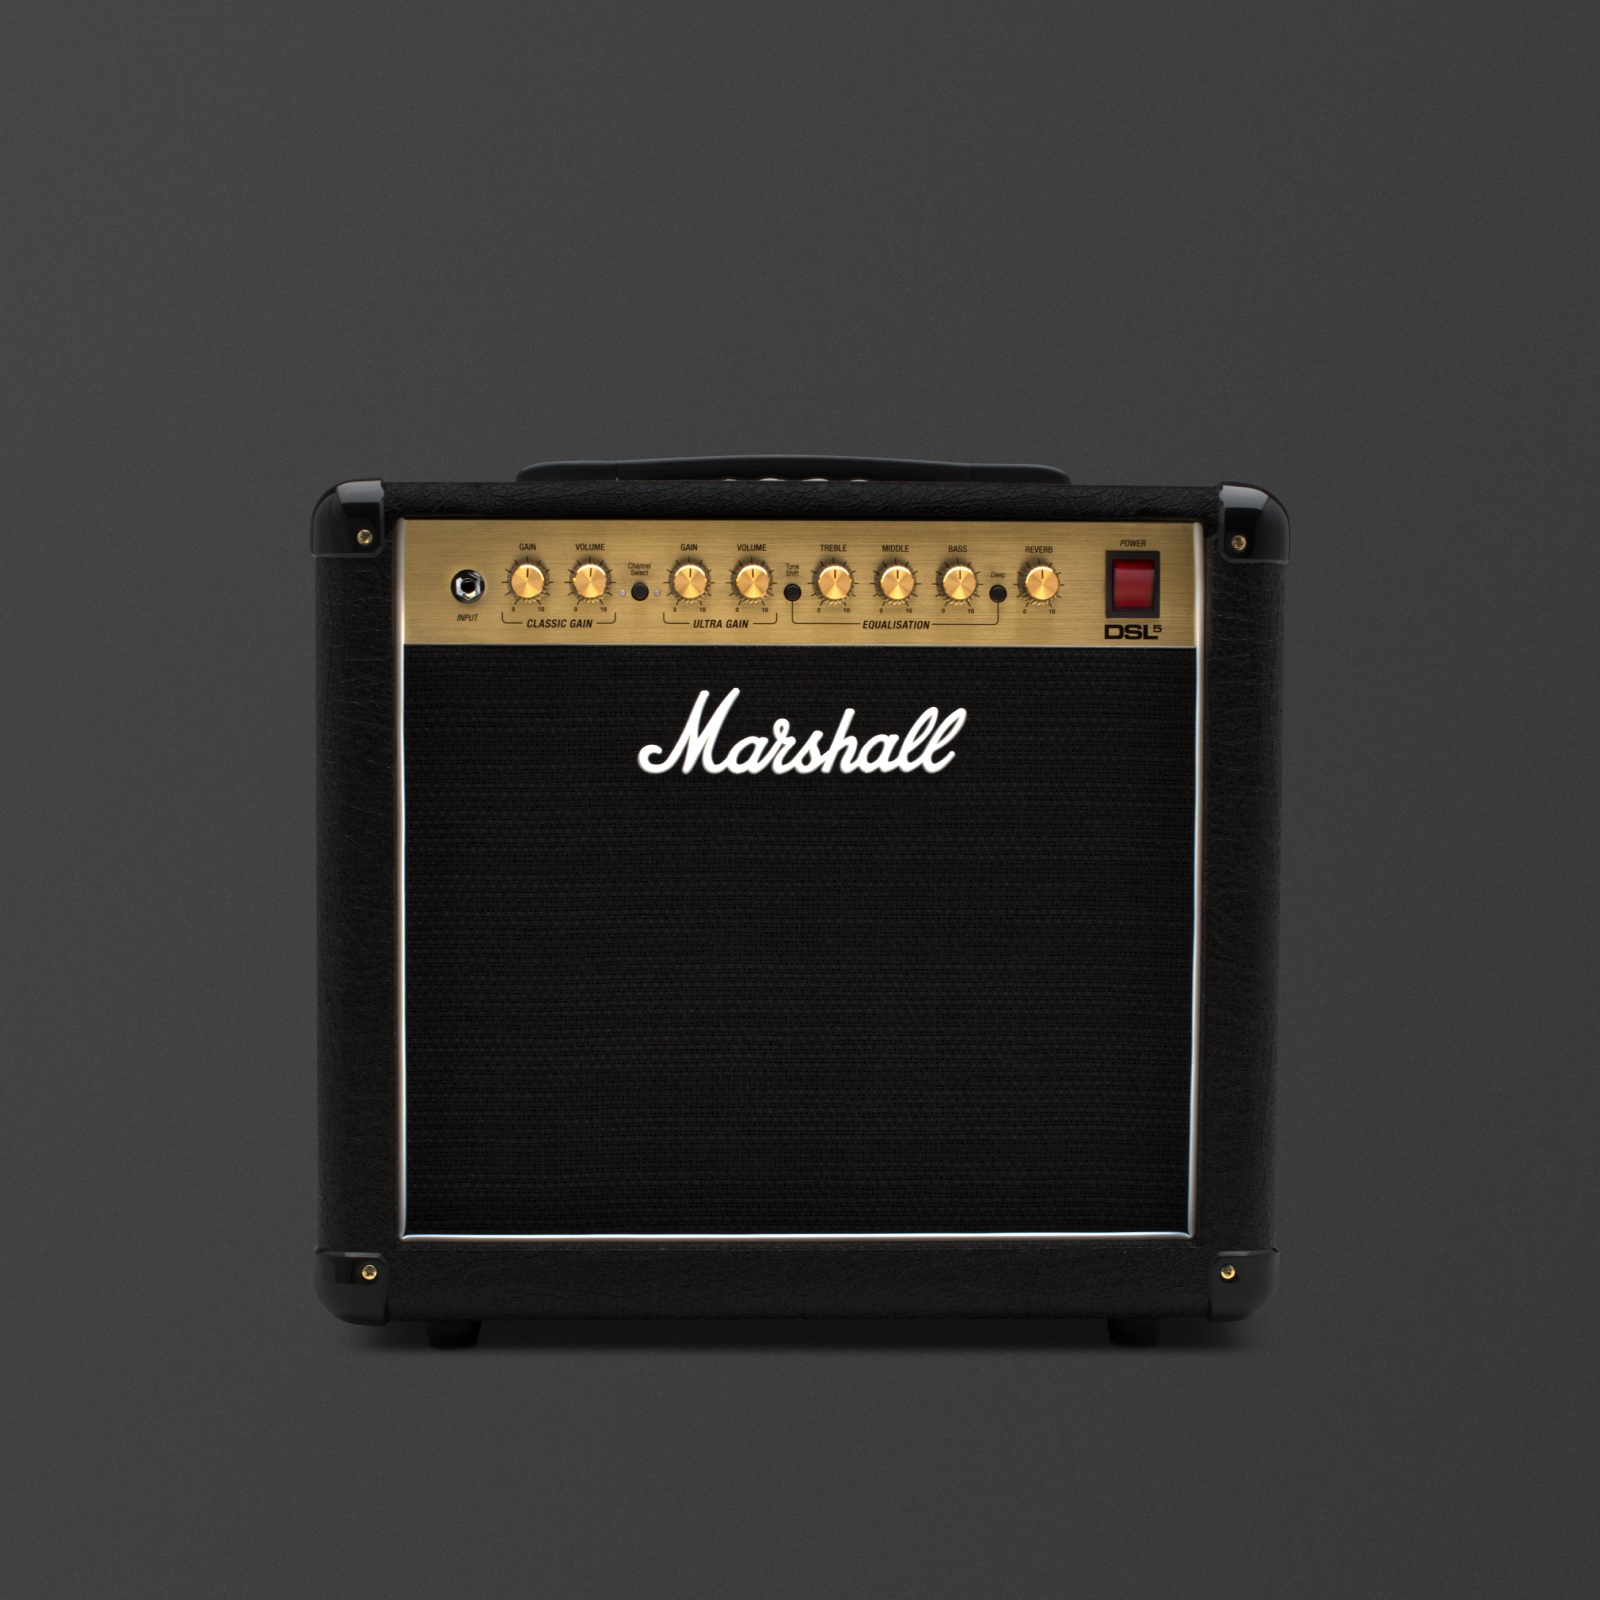 DSL5C 5W Combo amp for unmatched sound quality | Marshall.com